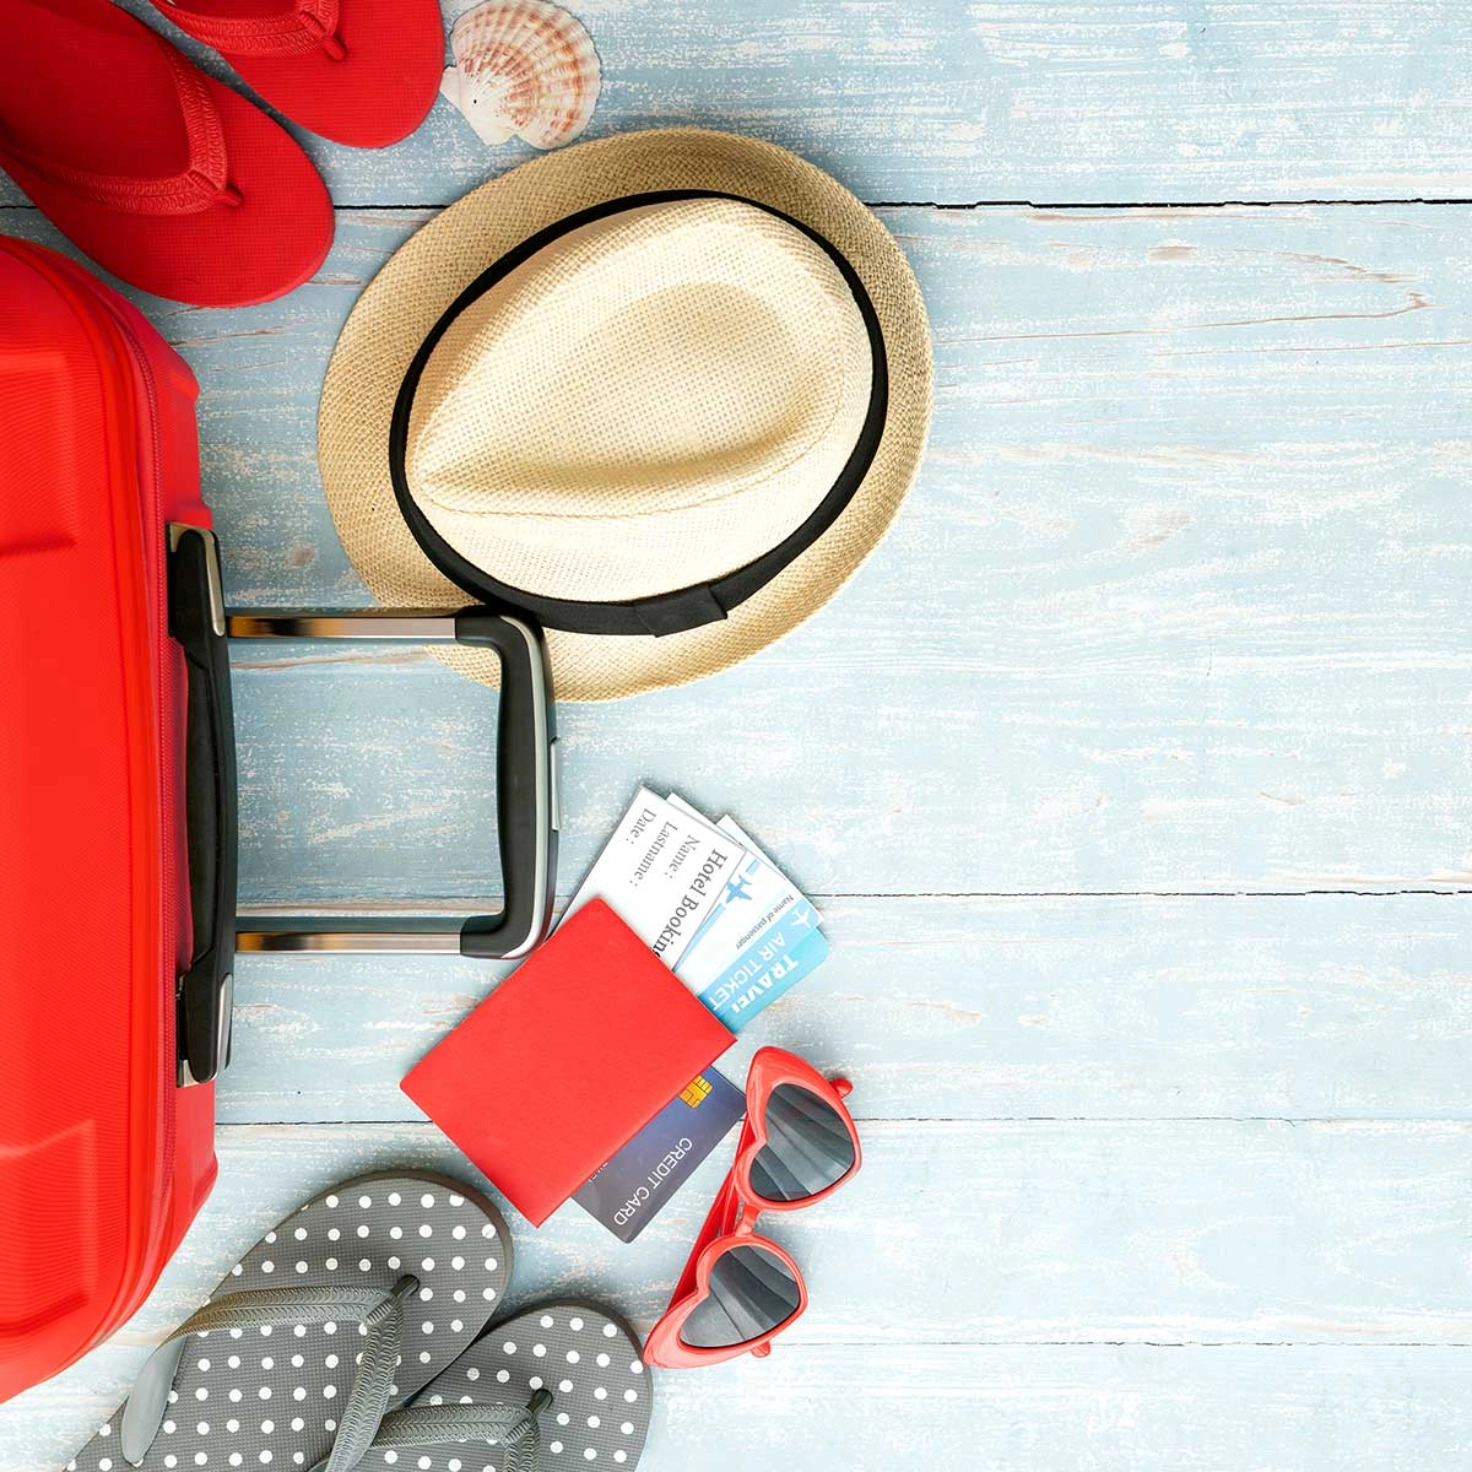 A suitcase lying on the floor with flip-flops, a hat and a passport next to it.